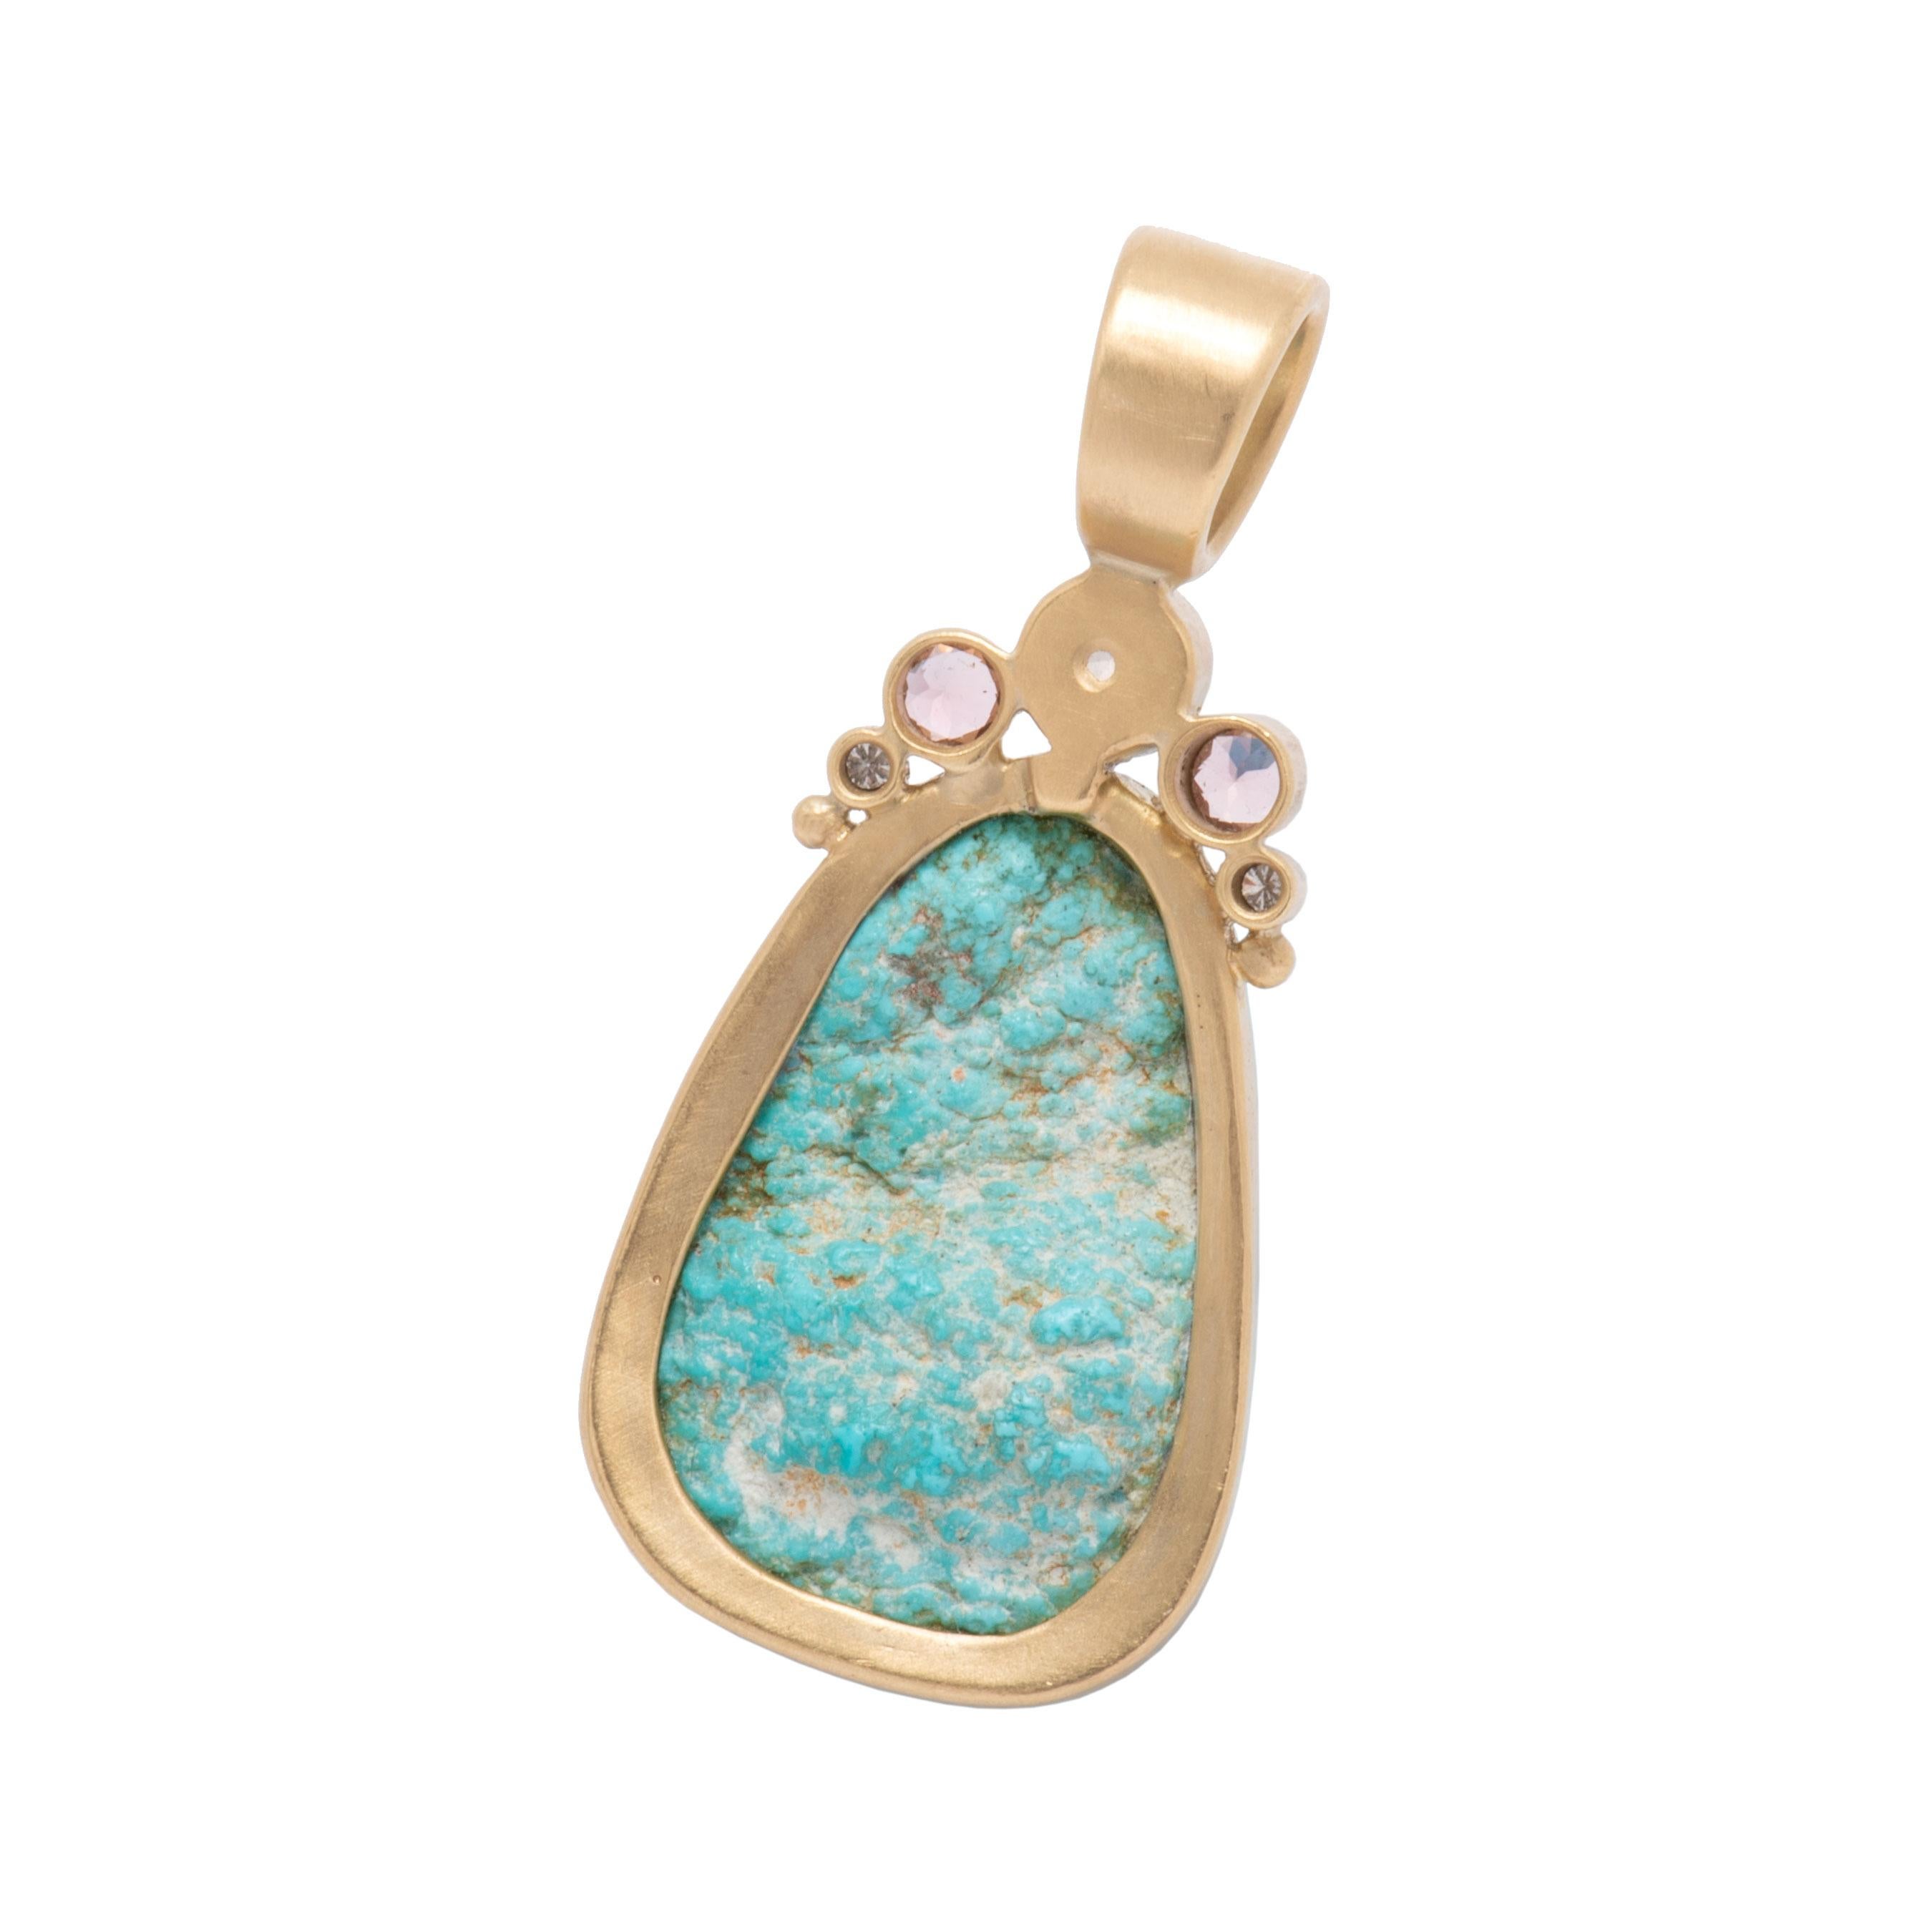 Candelaria Turquoise Cloud Pendant in 18 Karat Gold with Moonstone For Sale 1